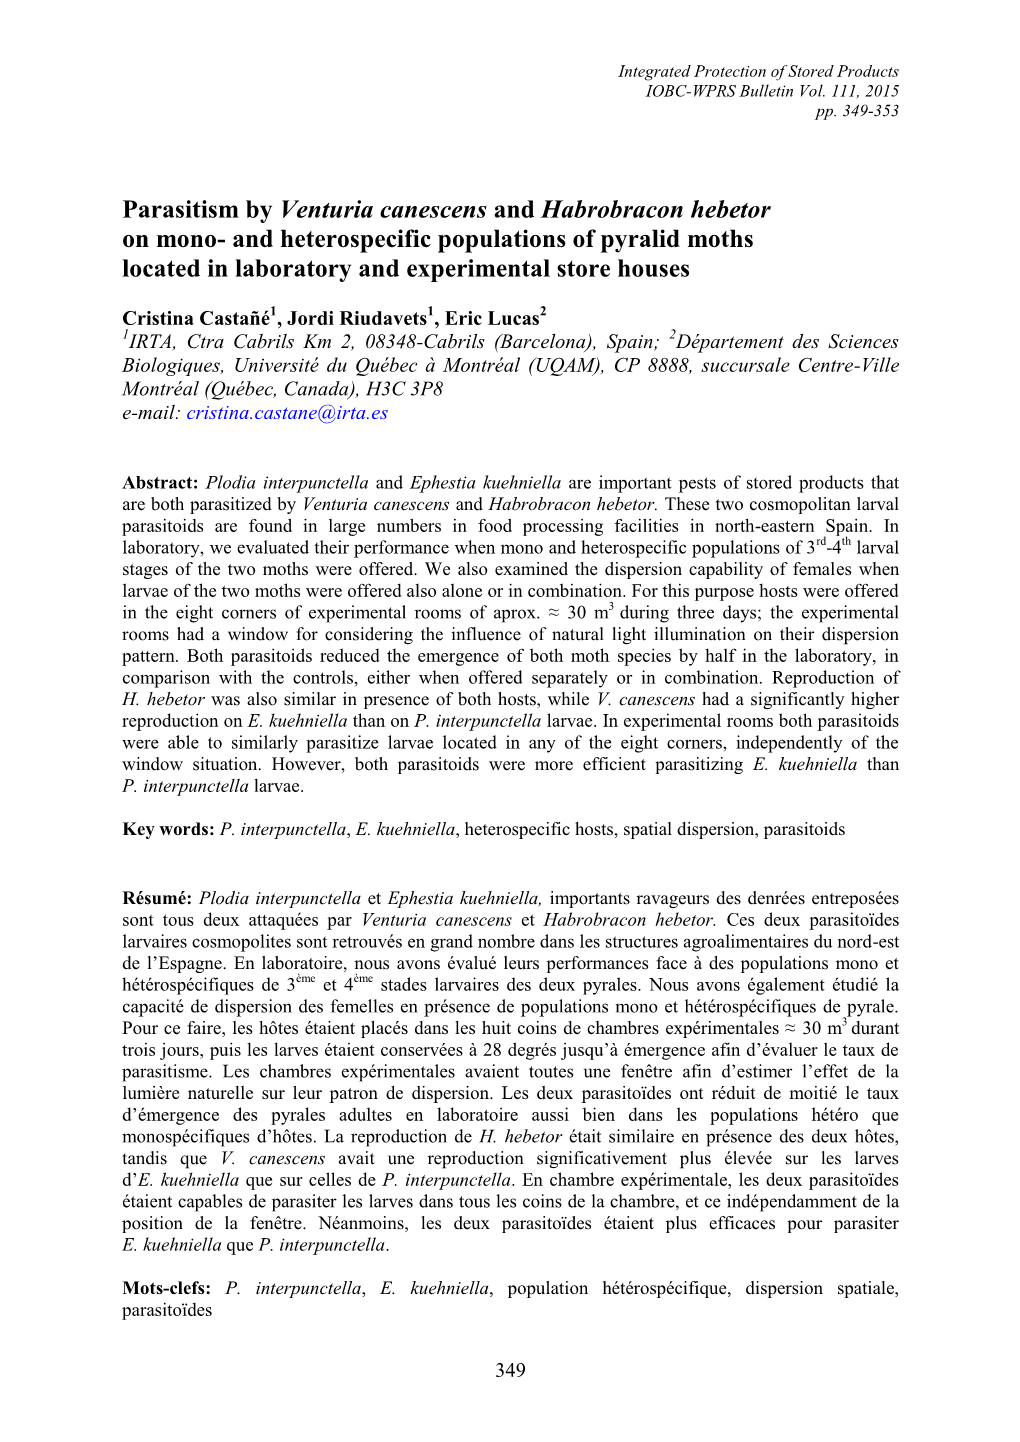 Parasitism by Venturia Canescens and Habrobracon Hebetor on Mono- and Heterospecific Populations of Pyralid Moths Located in Laboratory and Experimental Store Houses